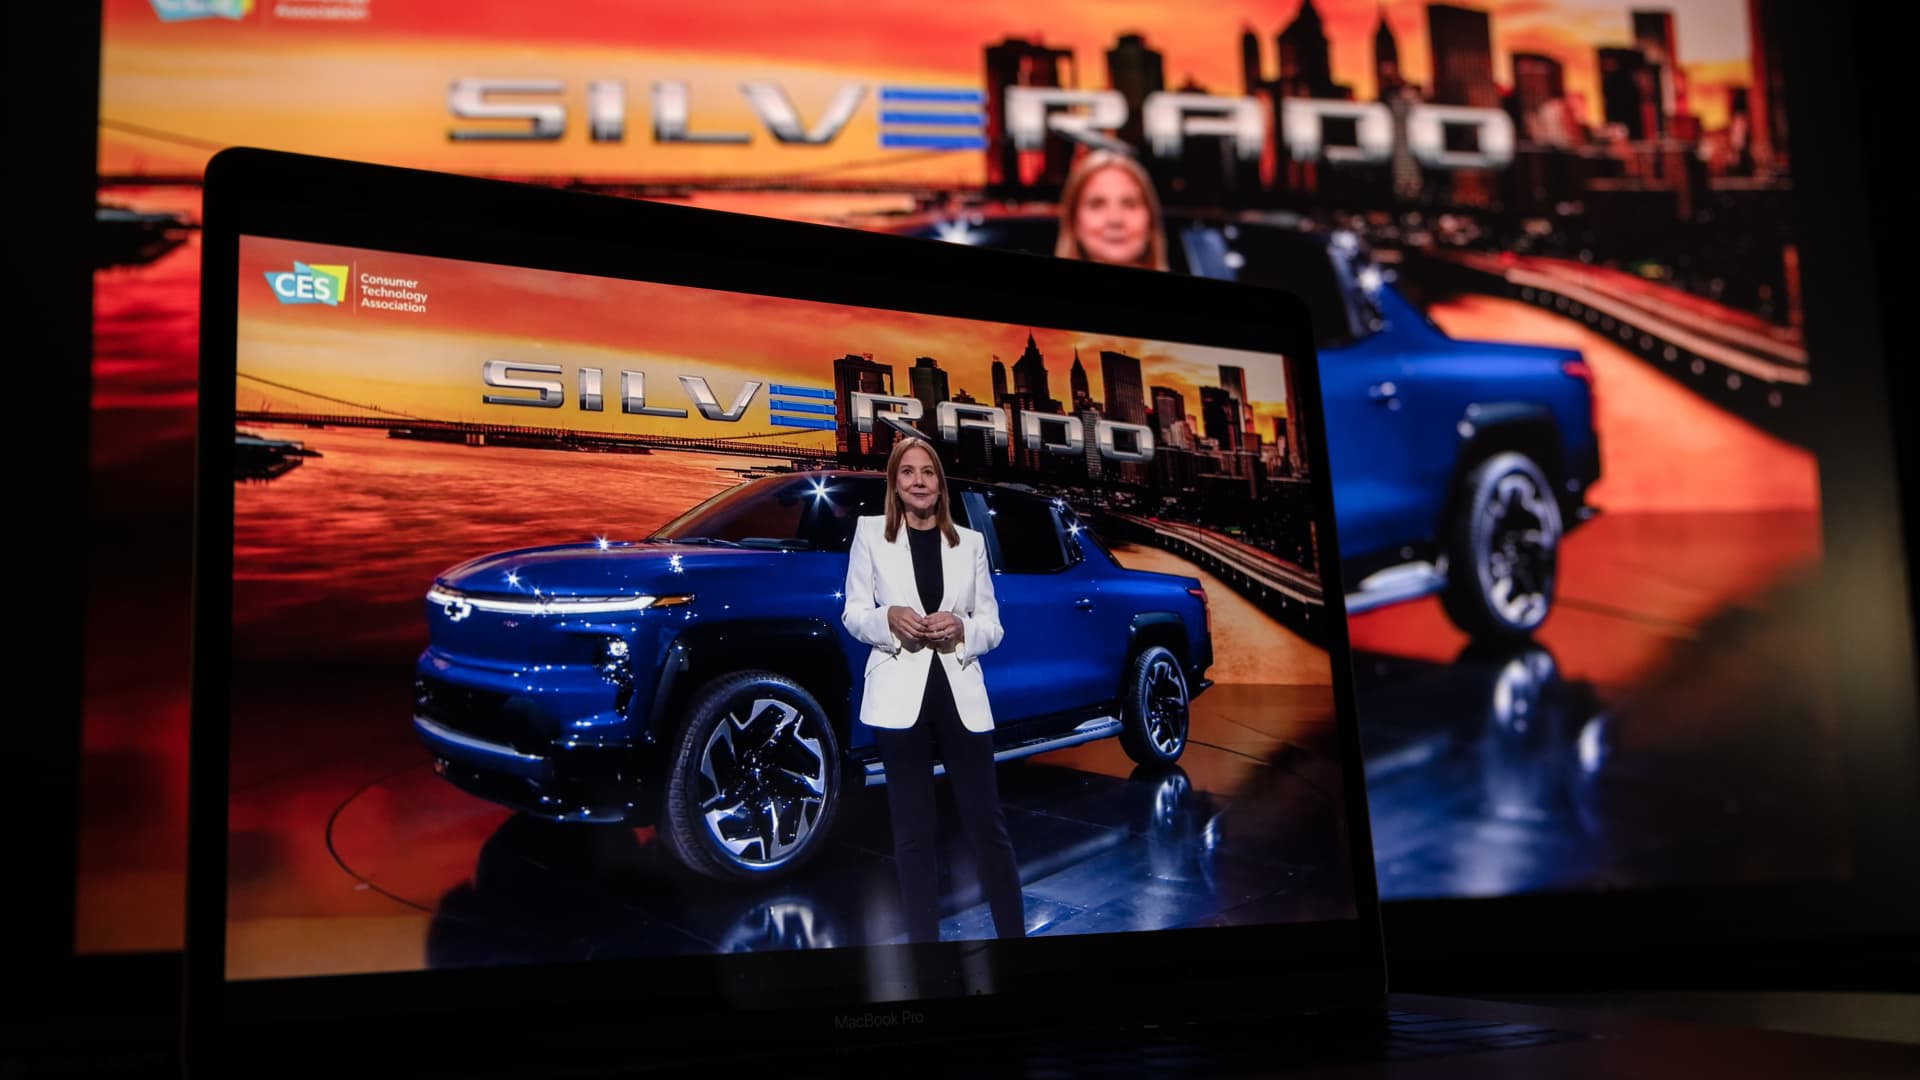 Mary Barra, chief executive officer of General Motors Co., presents the new Silverado elective vehicle during a live-streamed event at the CES 2022 trade show in Las Vegas, Nevada, U.S., on Wednesday, Jan. 5, 2022.